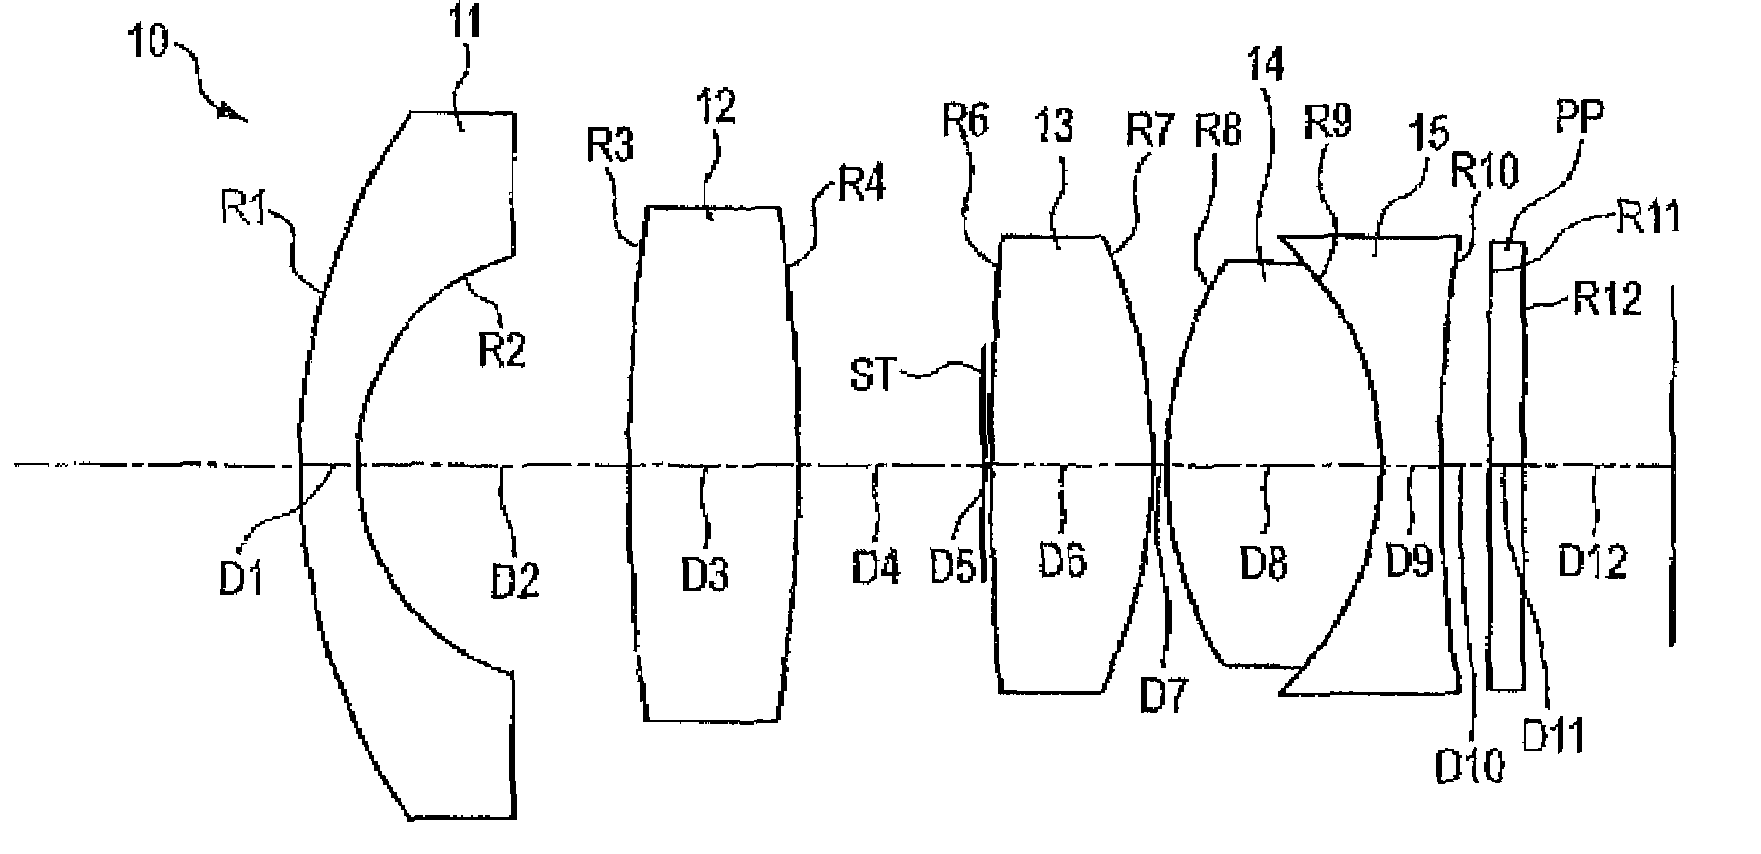 Imaging lens and camera system including the same lens